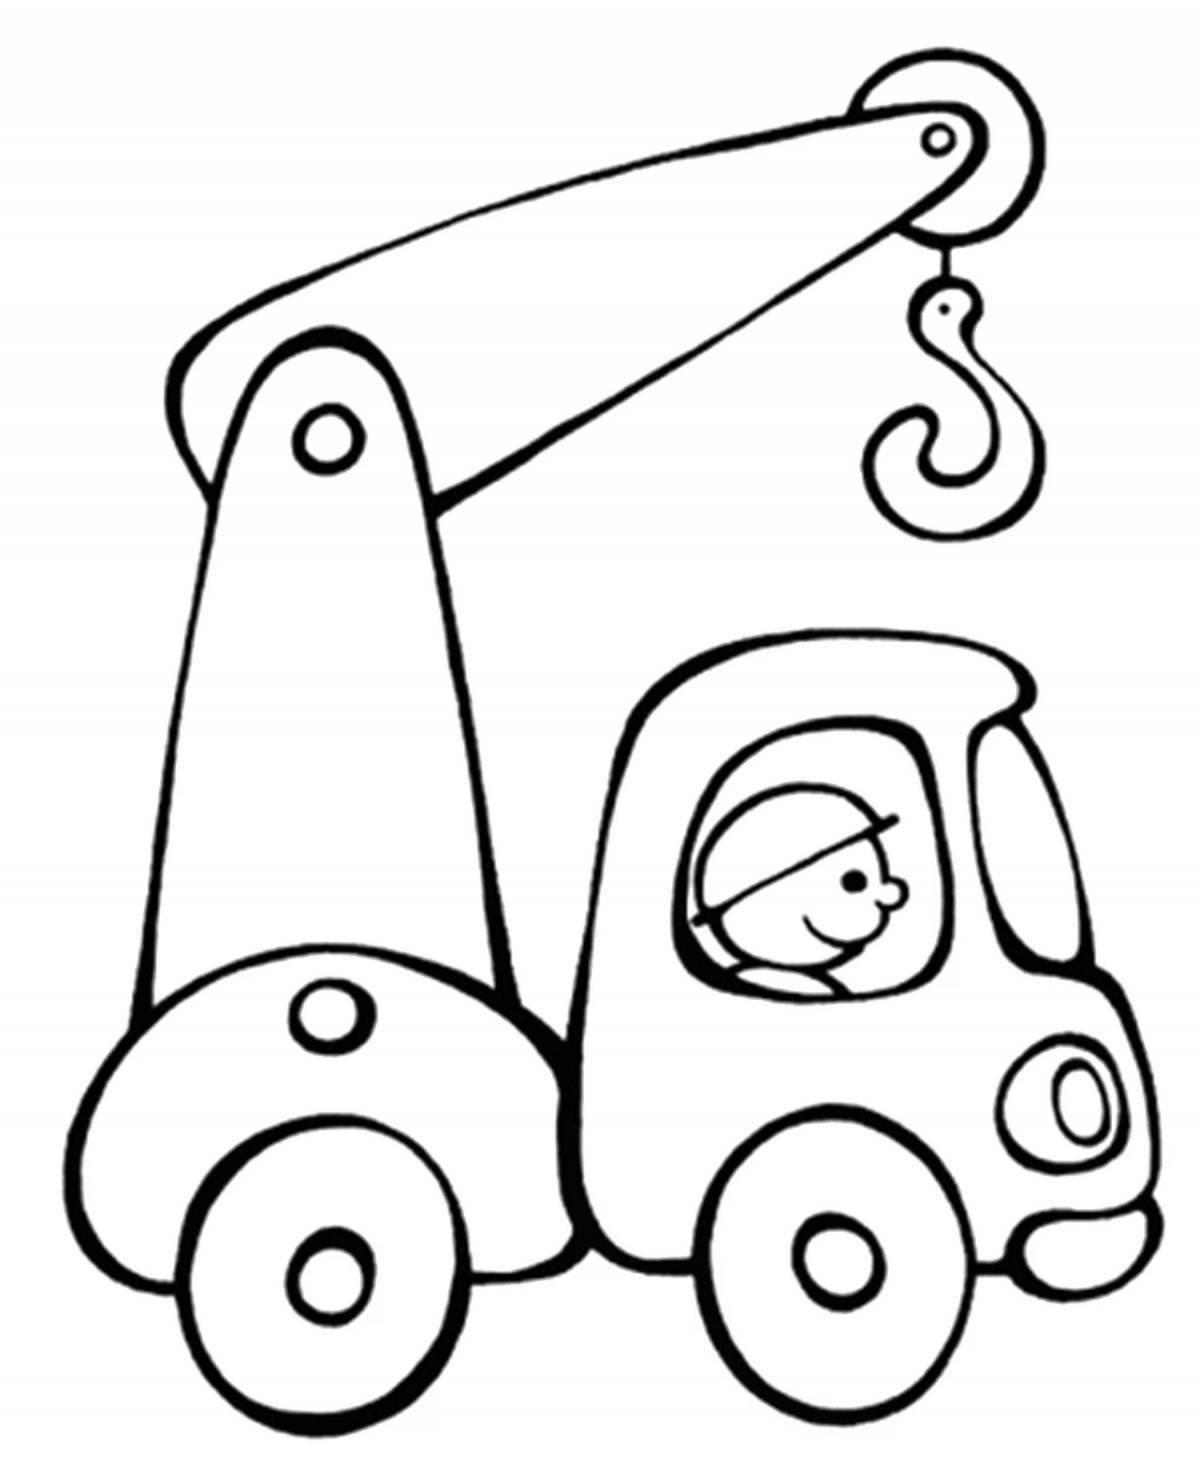 Coloring for bright cars for 2 year olds